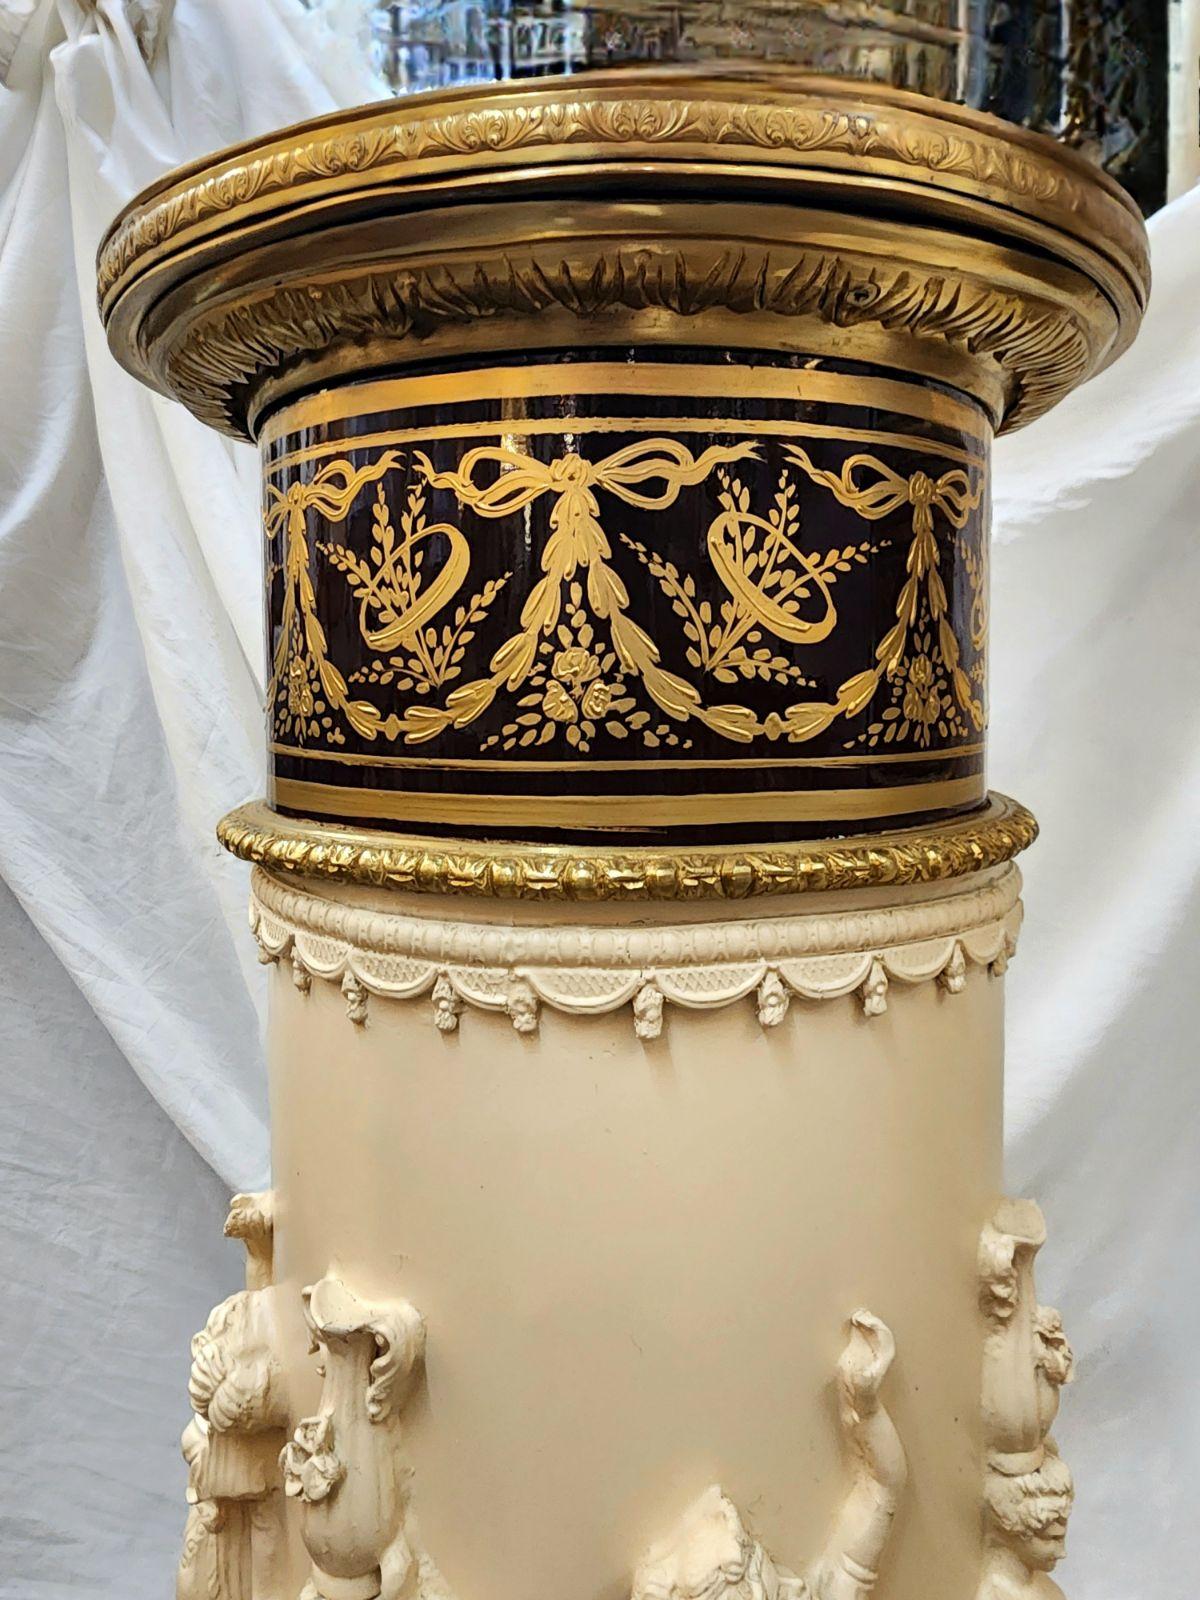 A Pair of Neoclassical Pedestals with Gilt Bronze mounts and sculpted figures. 